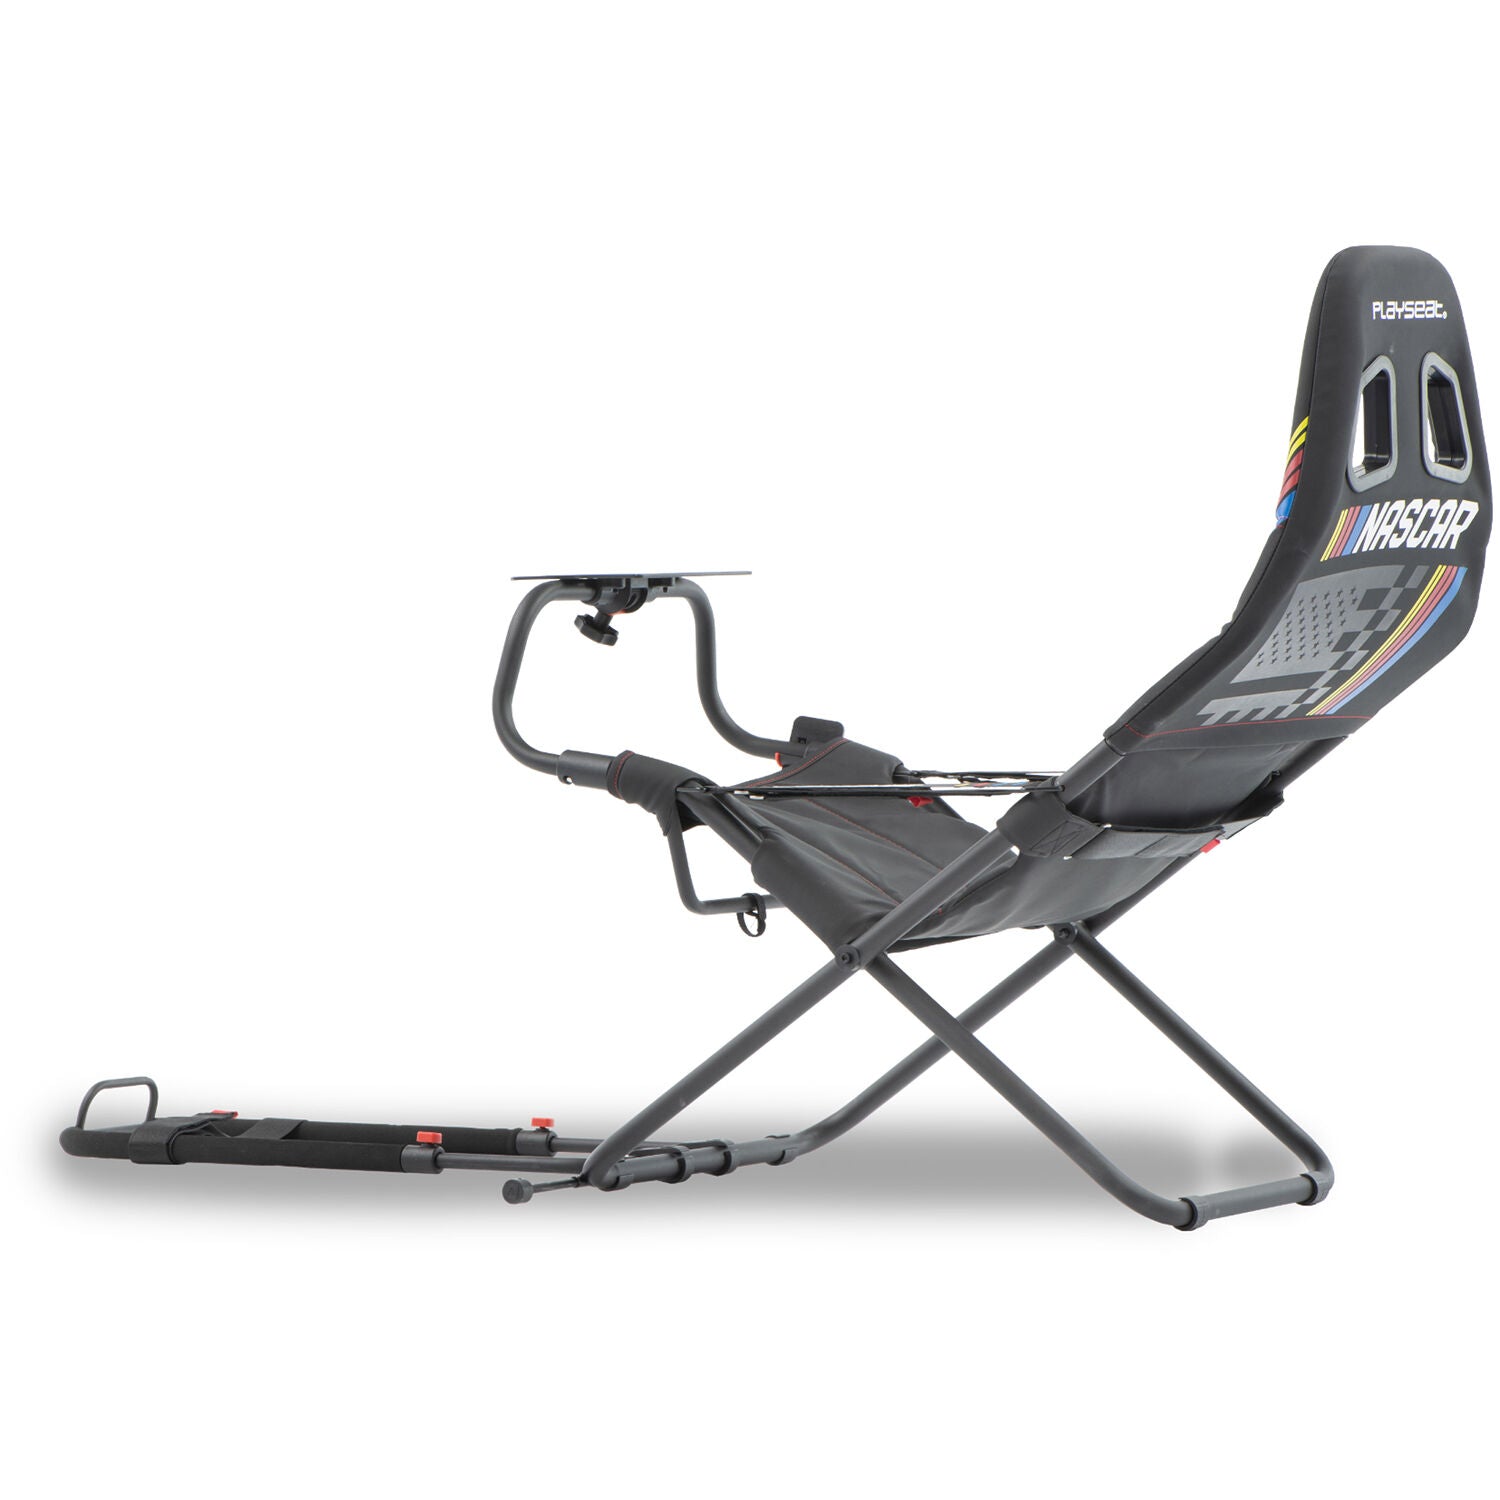 Playseat RN.00188 Challenge Foldable Adjustable High Performance Sim Racing Cockpit for PC and Console, Nascar Edition